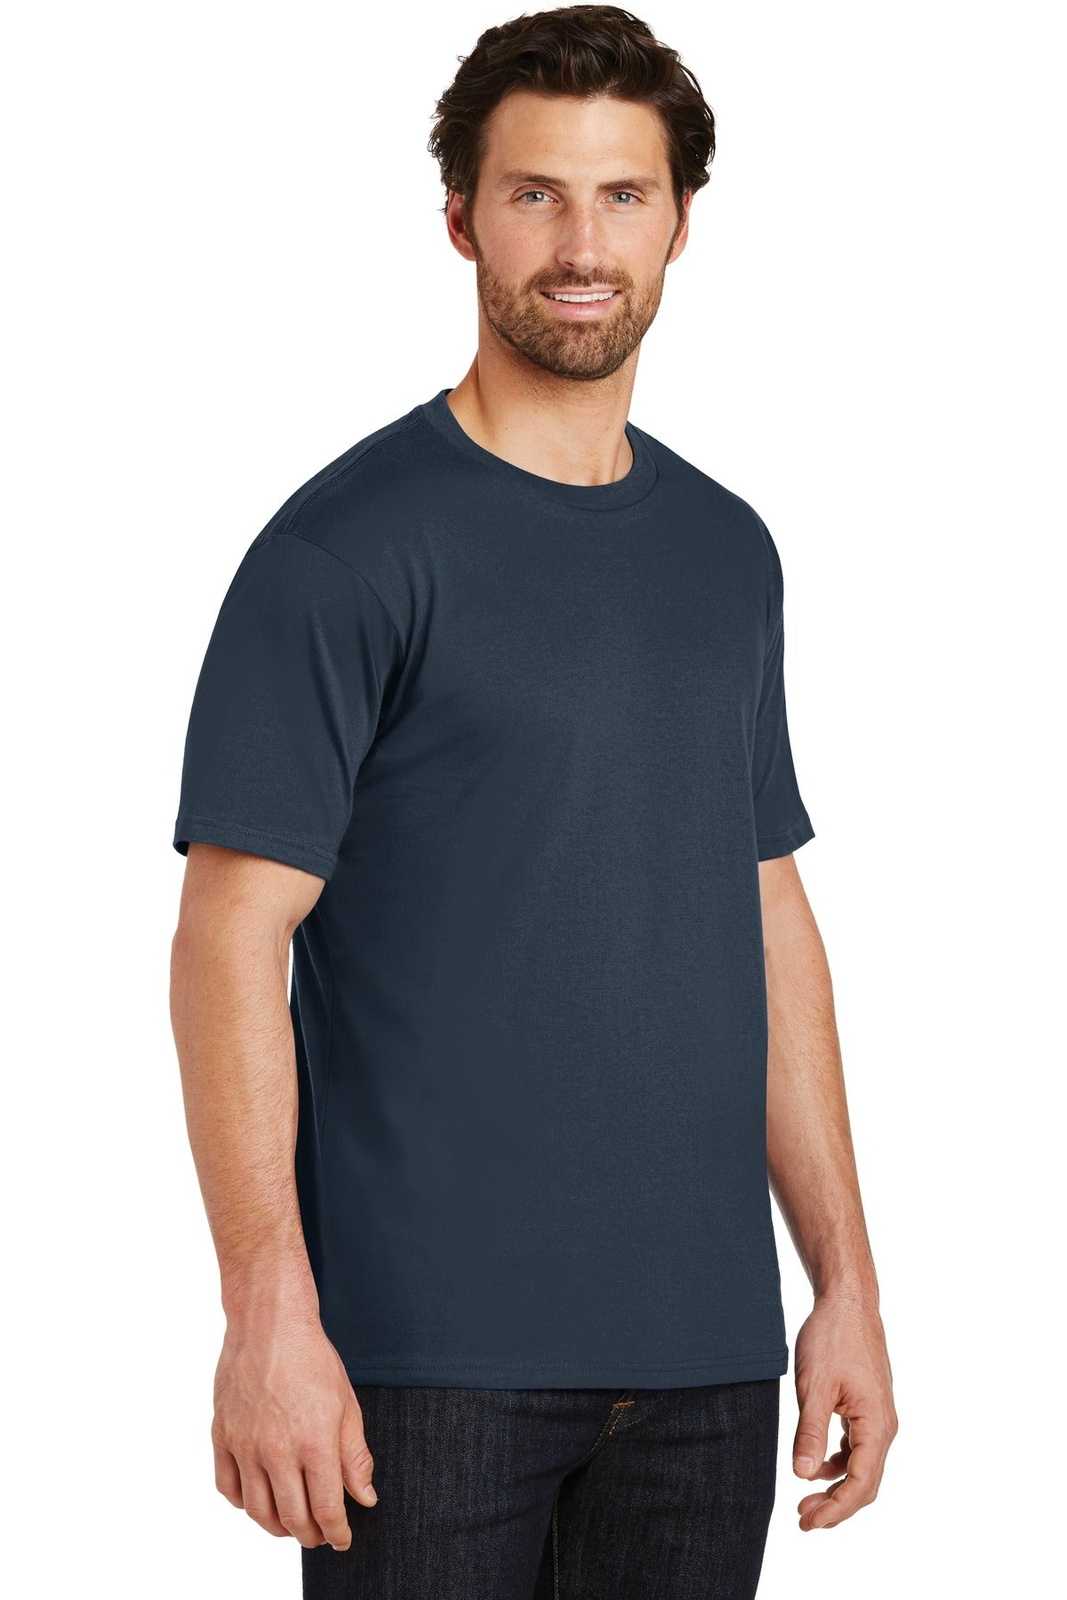 District DT104 Perfect Weight Tee - New Navy - HIT a Double - 4